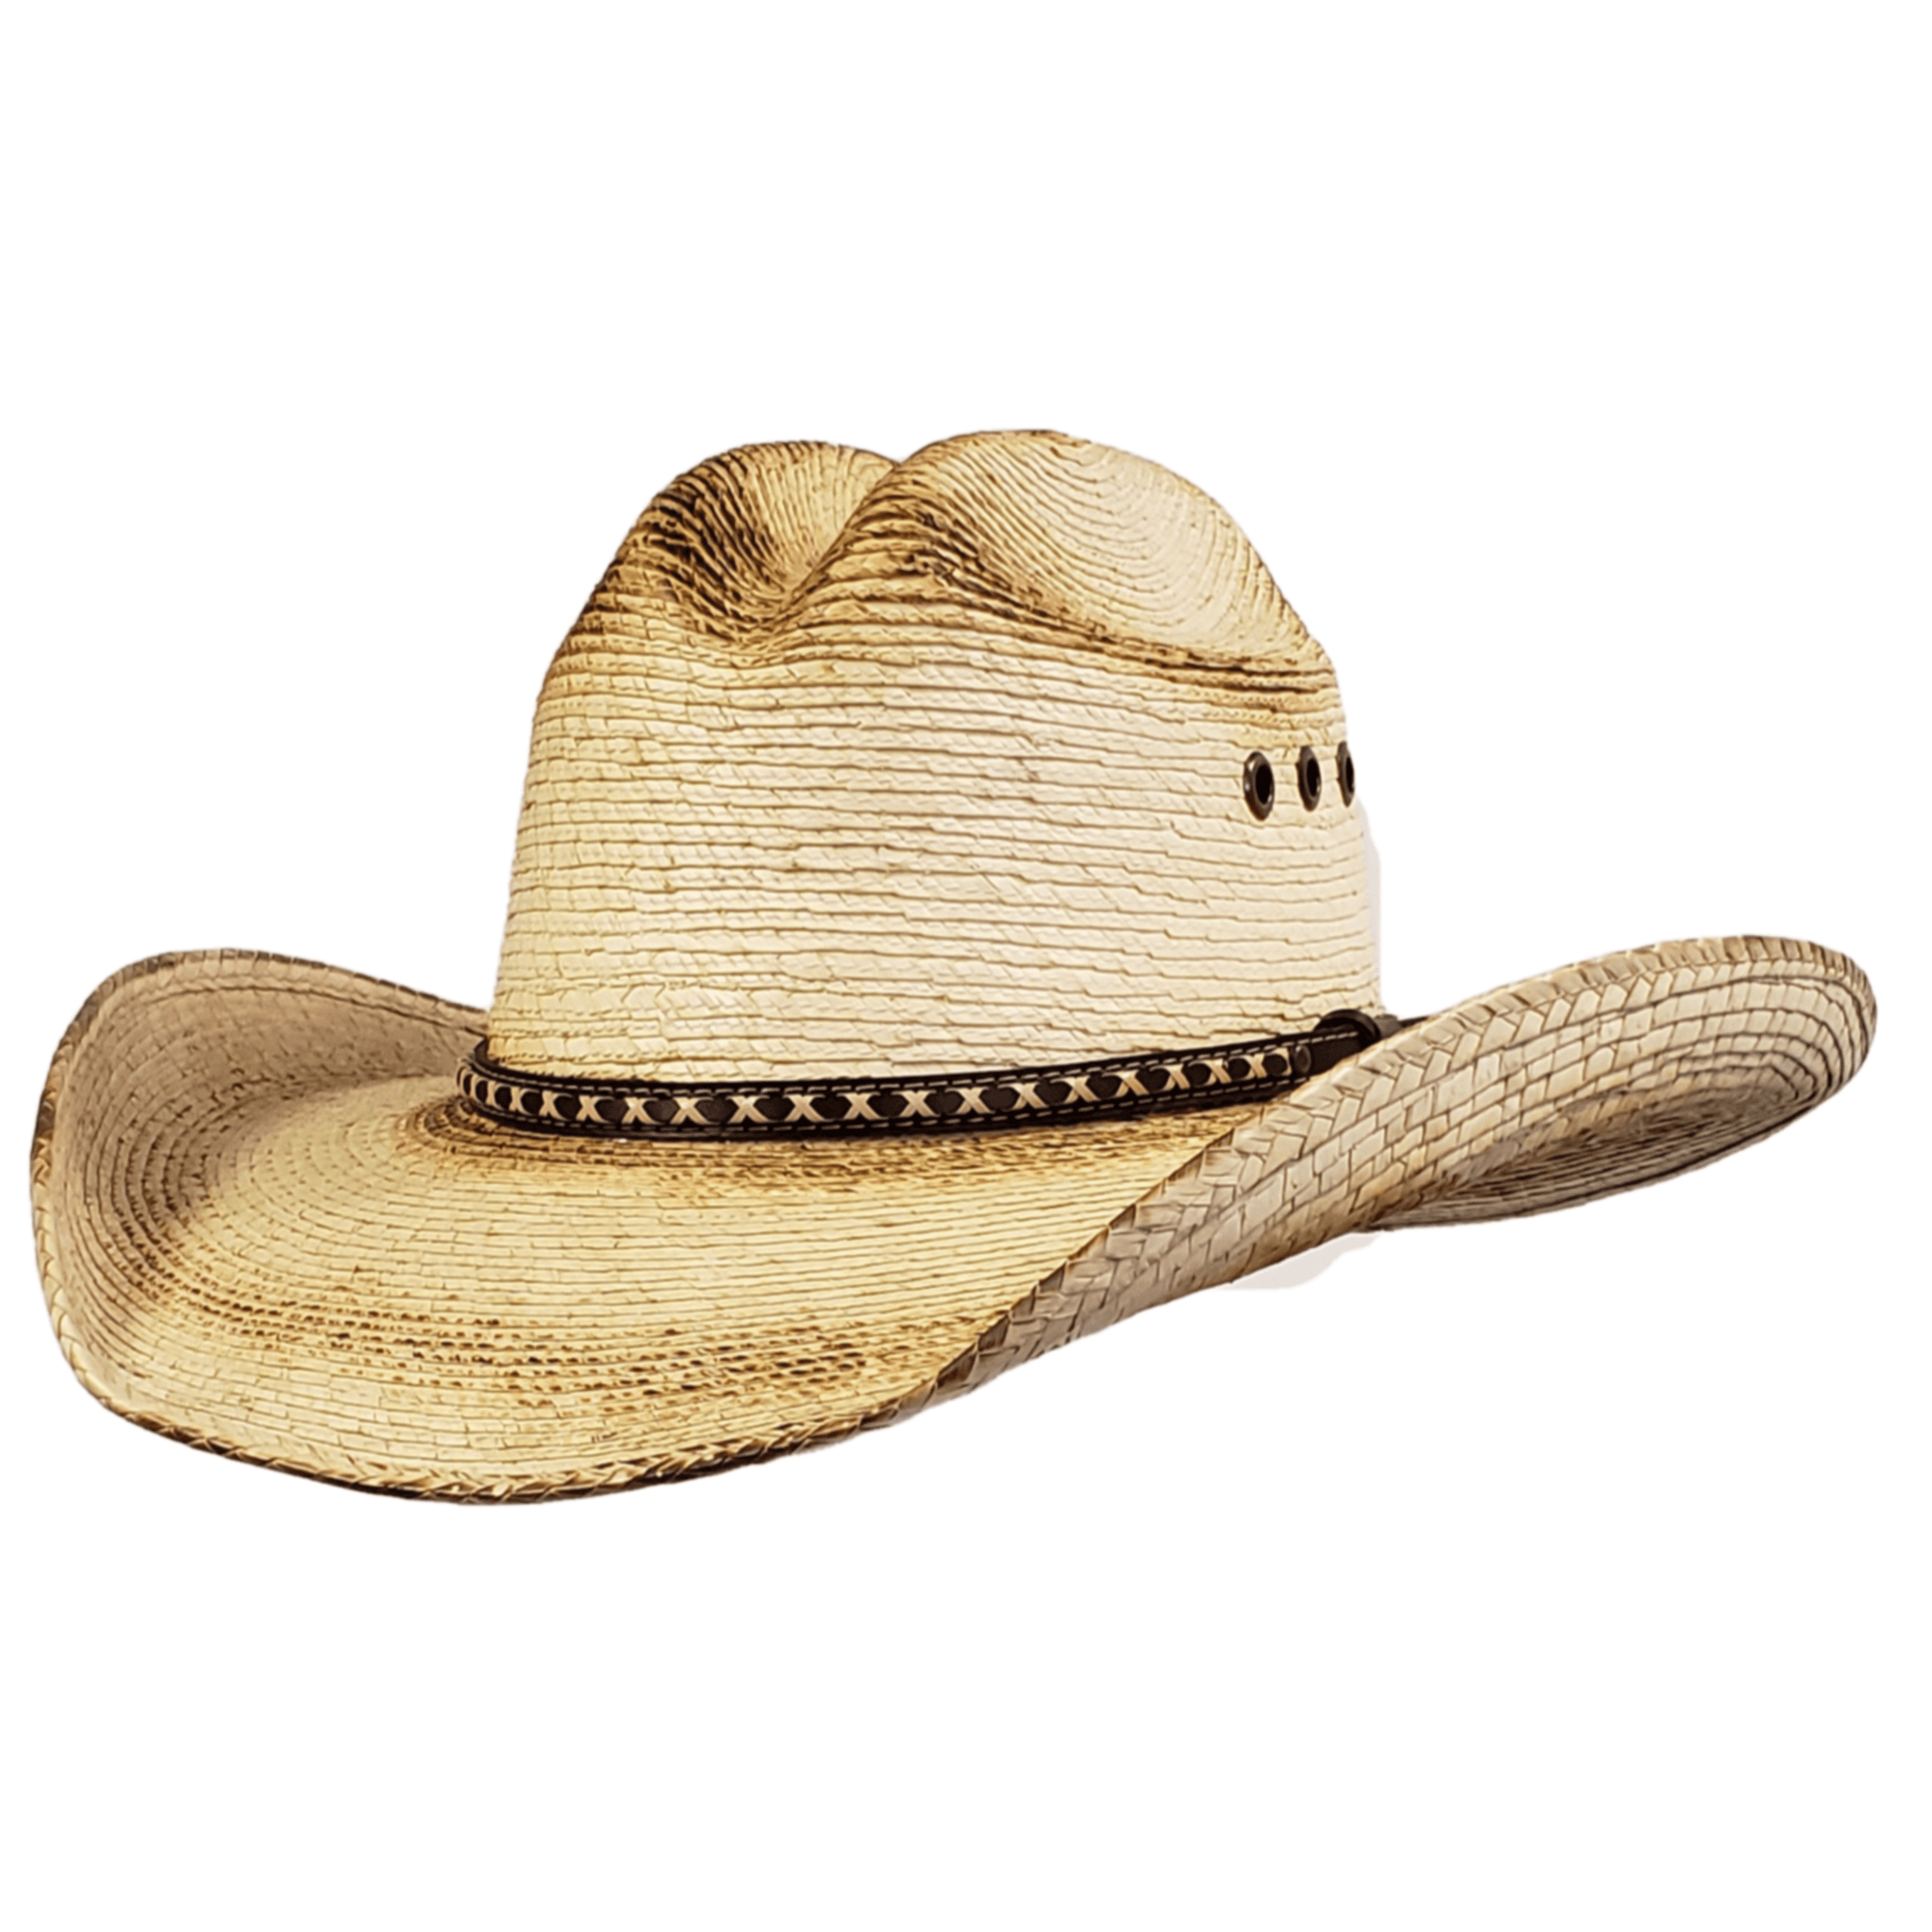 Gone Country Hats Men & Women's Hats Backroads Natural - Palm